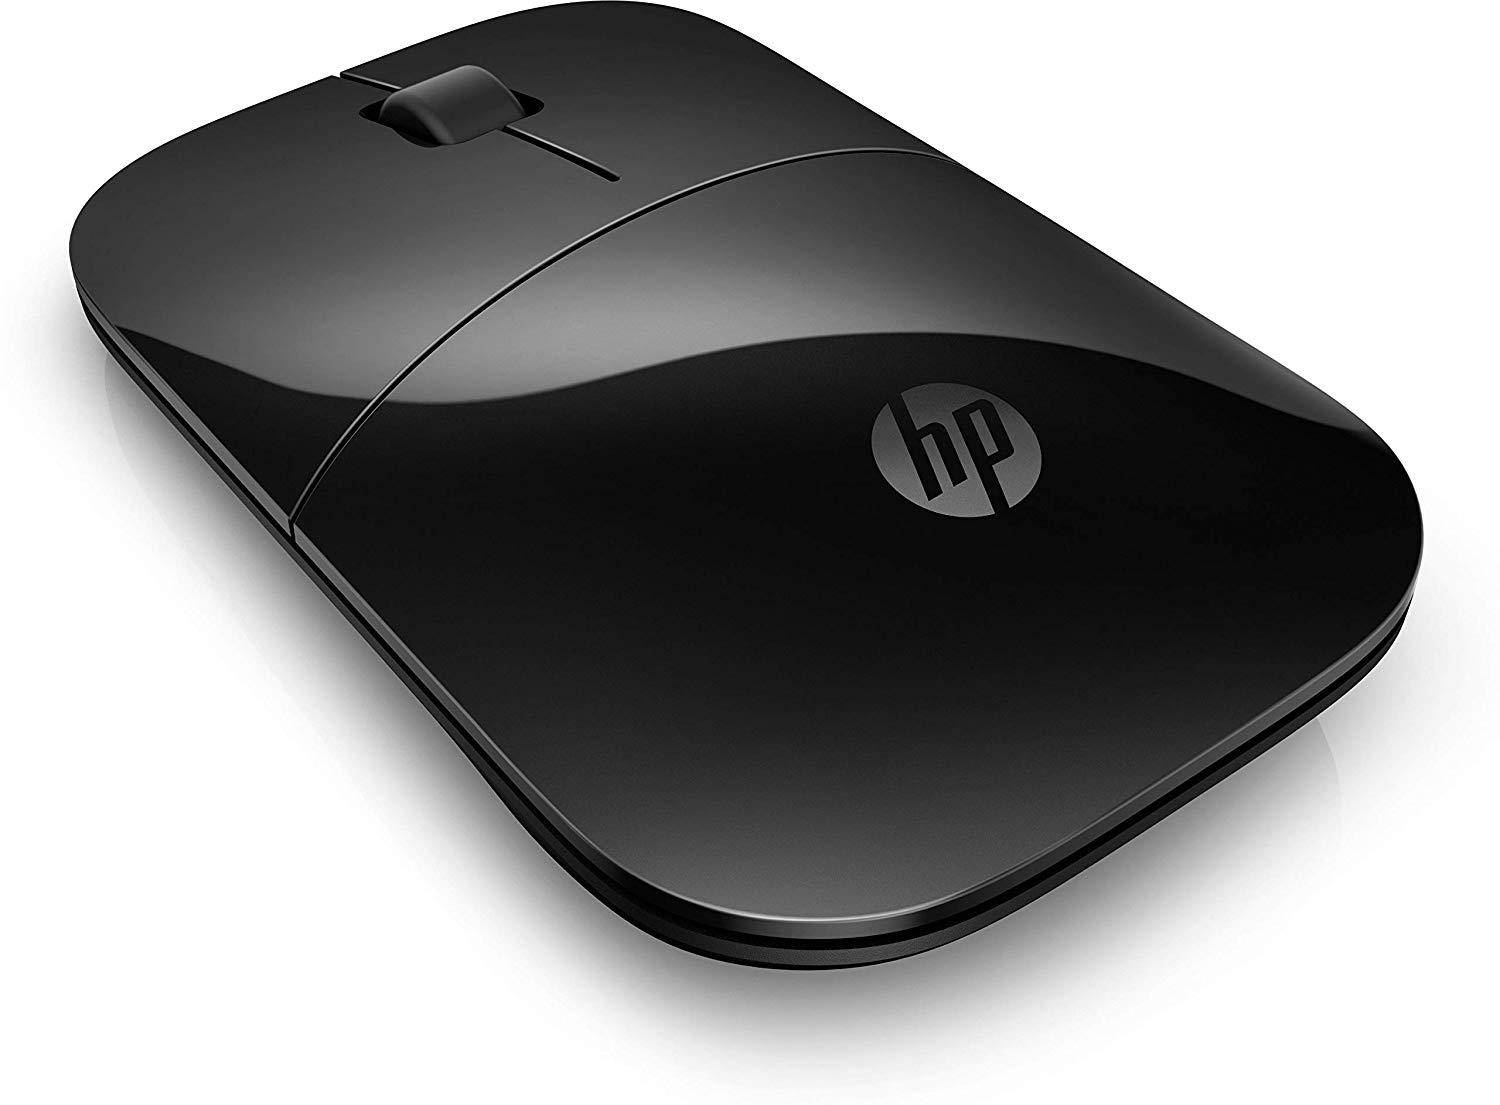 HP Z3700 Wireless Mouse zoom image